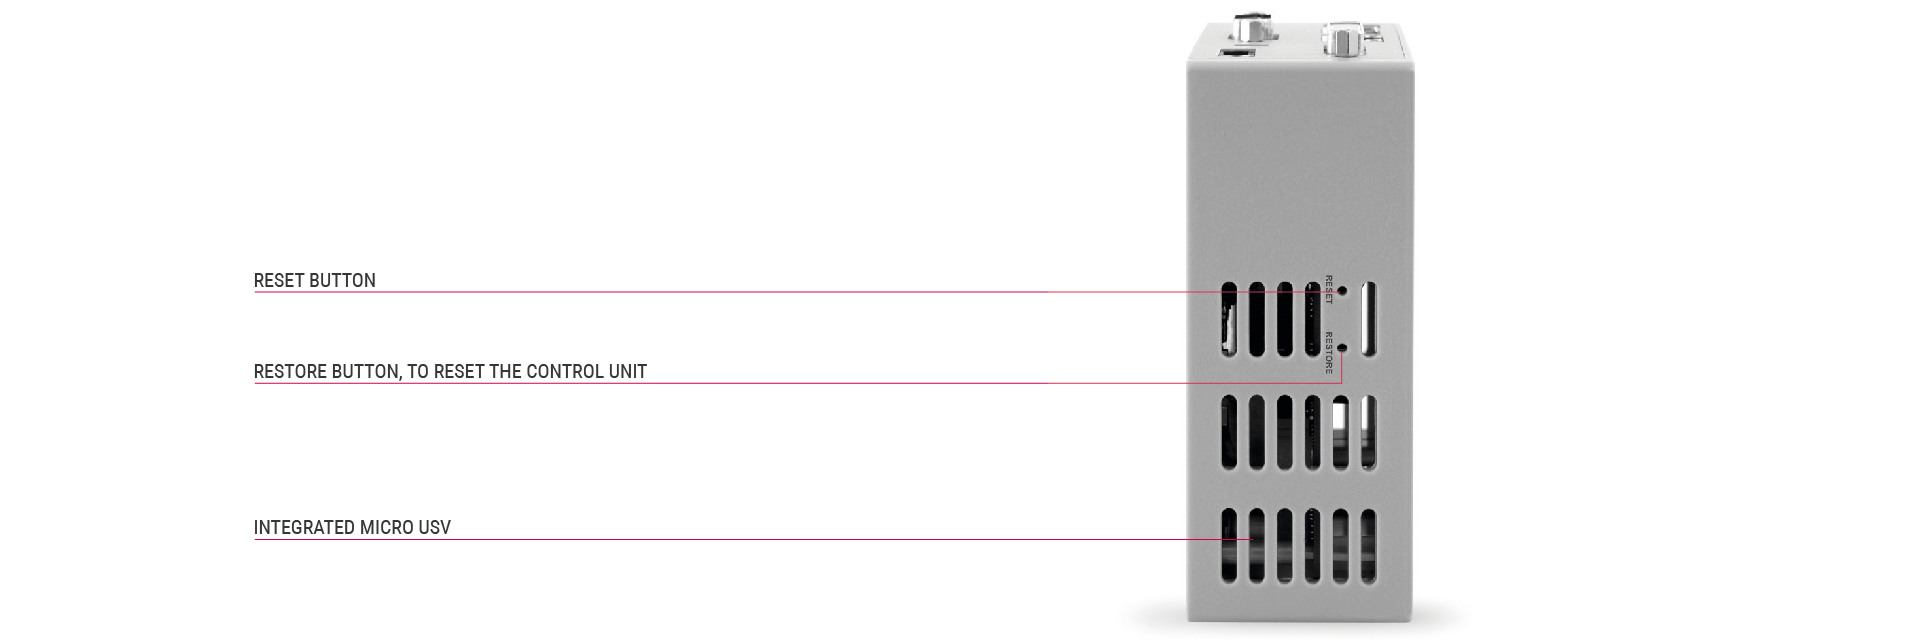 Rear view of the product with features of the C6 SMART DIN rail IPC